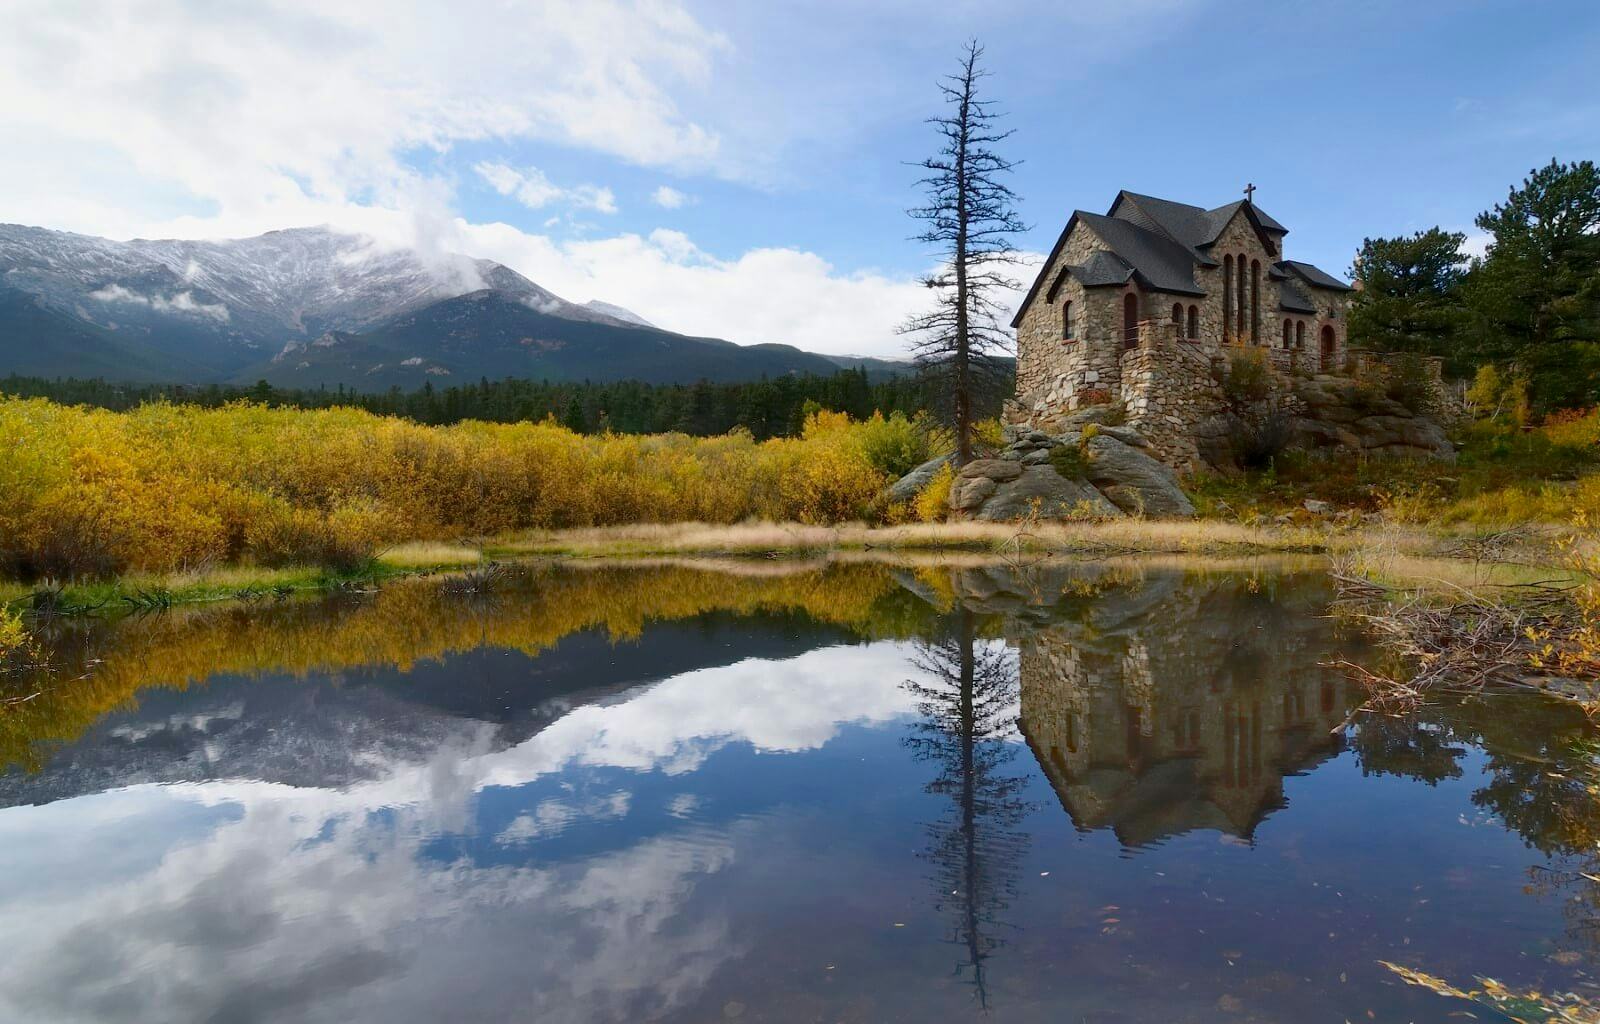 Rocky Mountains church by a still lake with mountains in the background in Estes Park